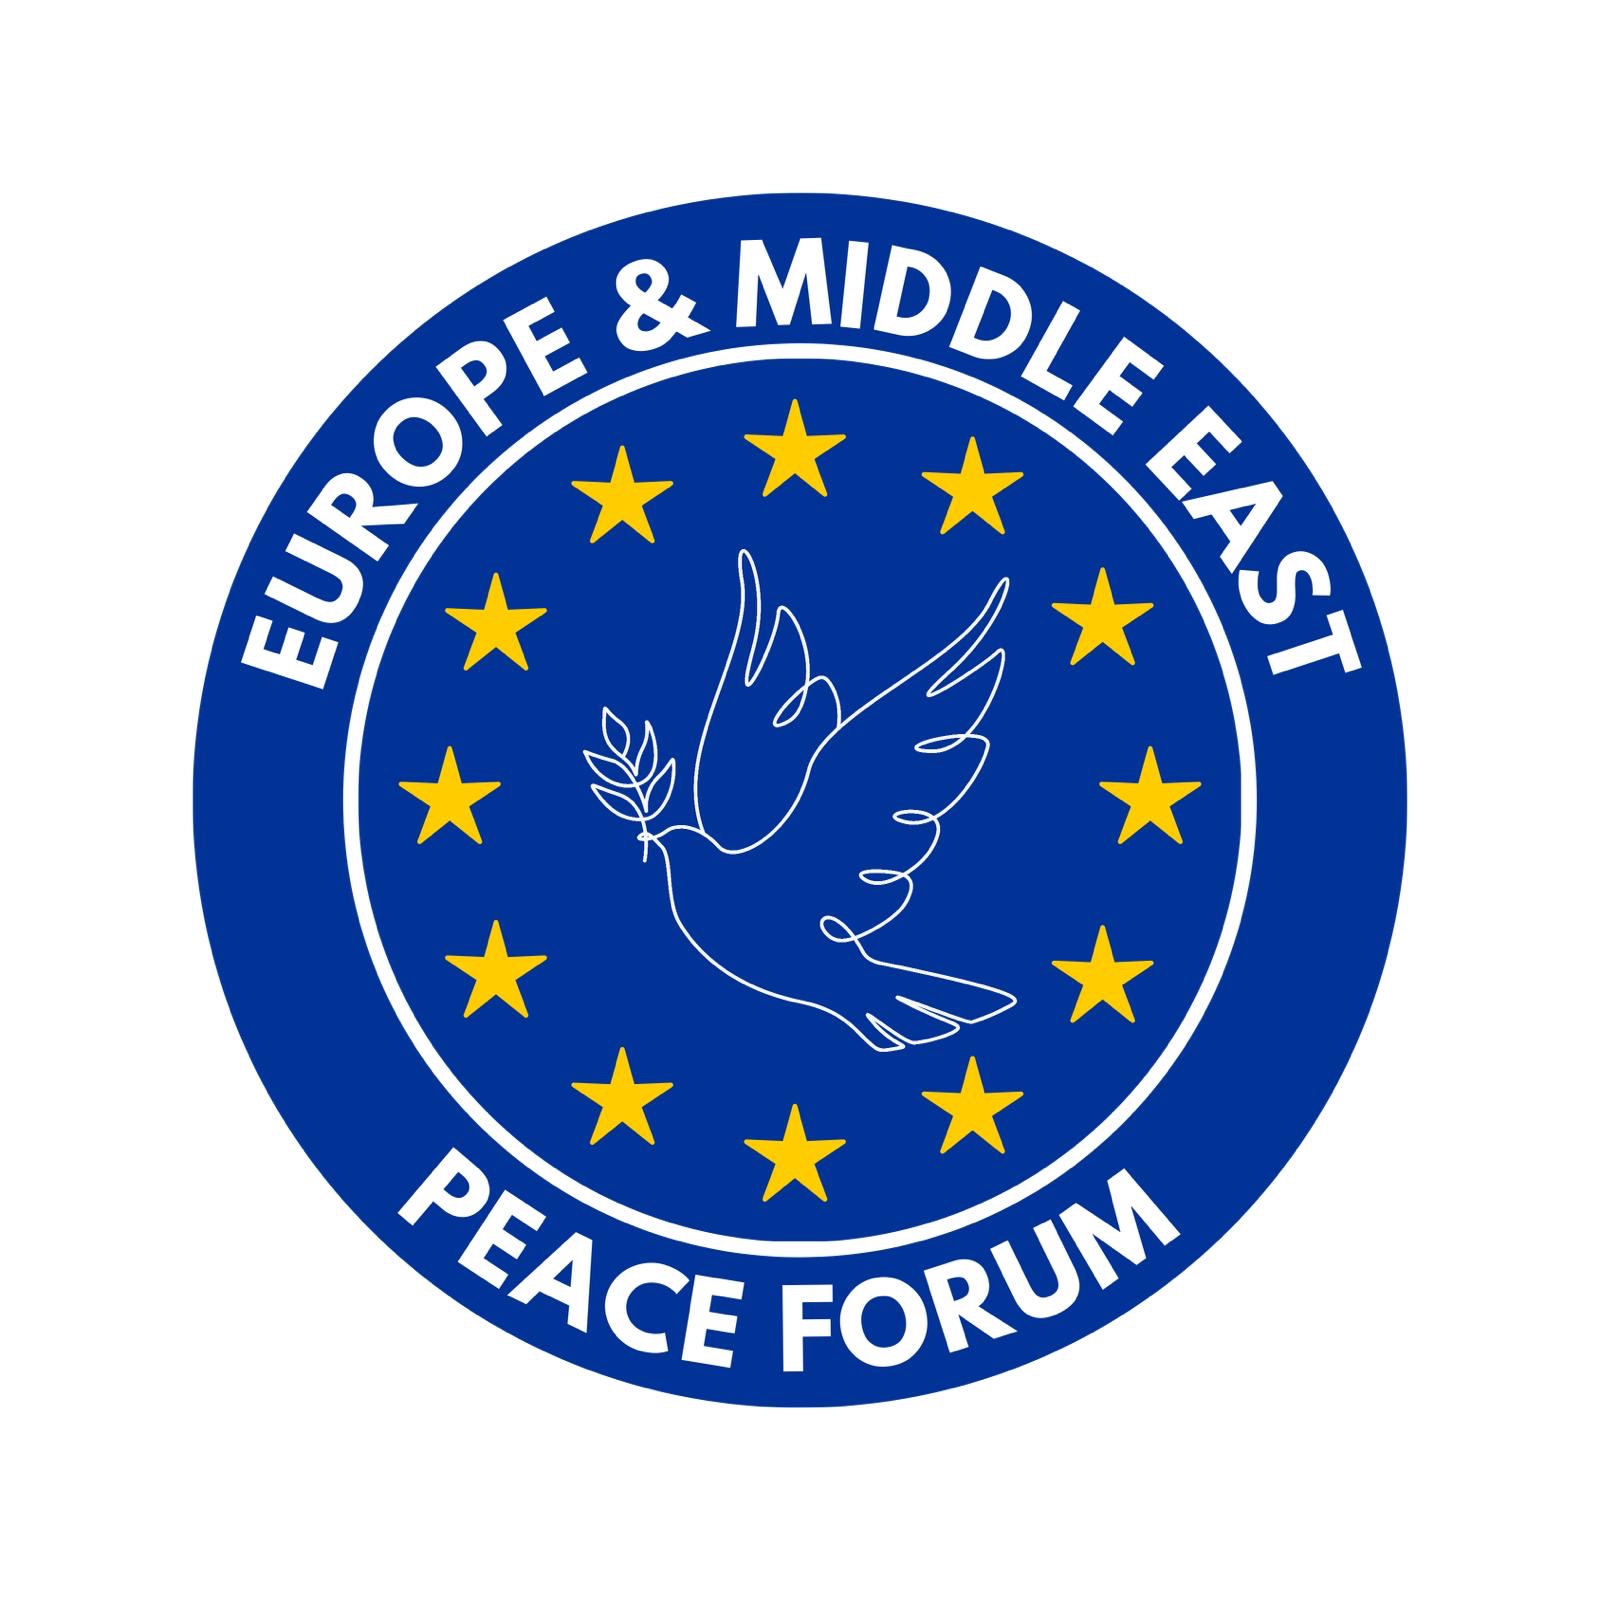 Europe & Middle East Peace Forum